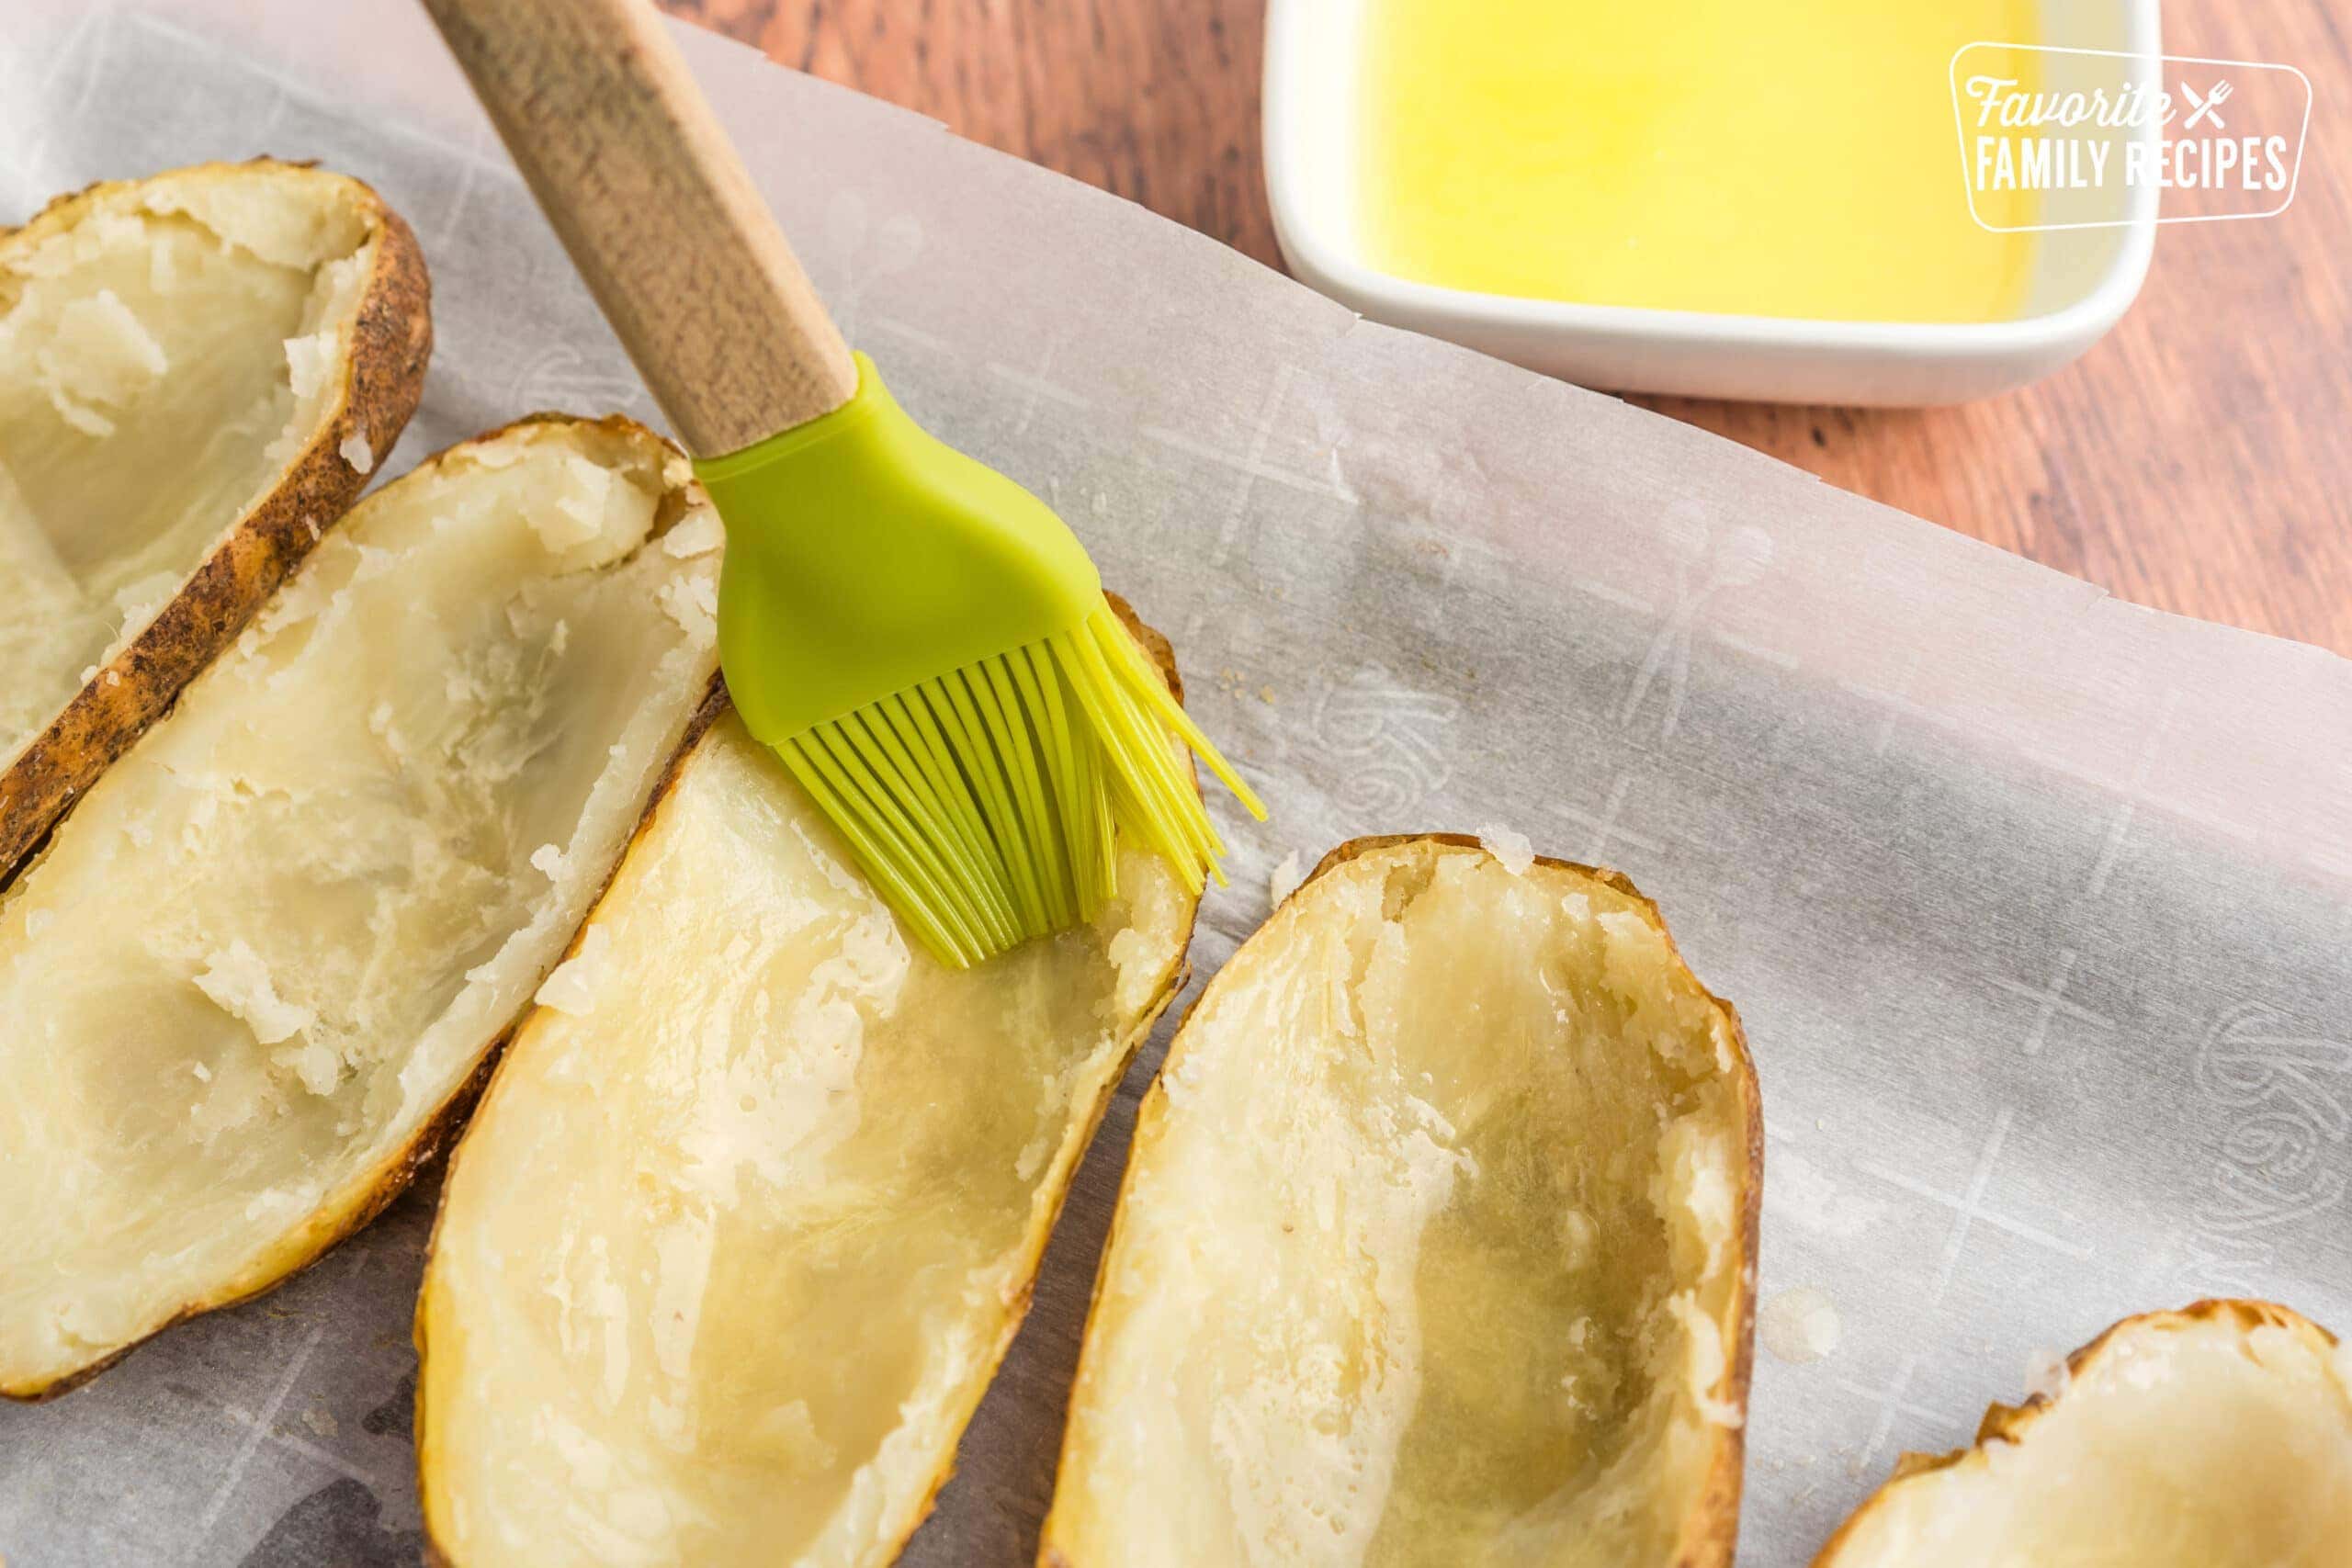 Potato skins being brushed with melted butter to make twice baked potatoes